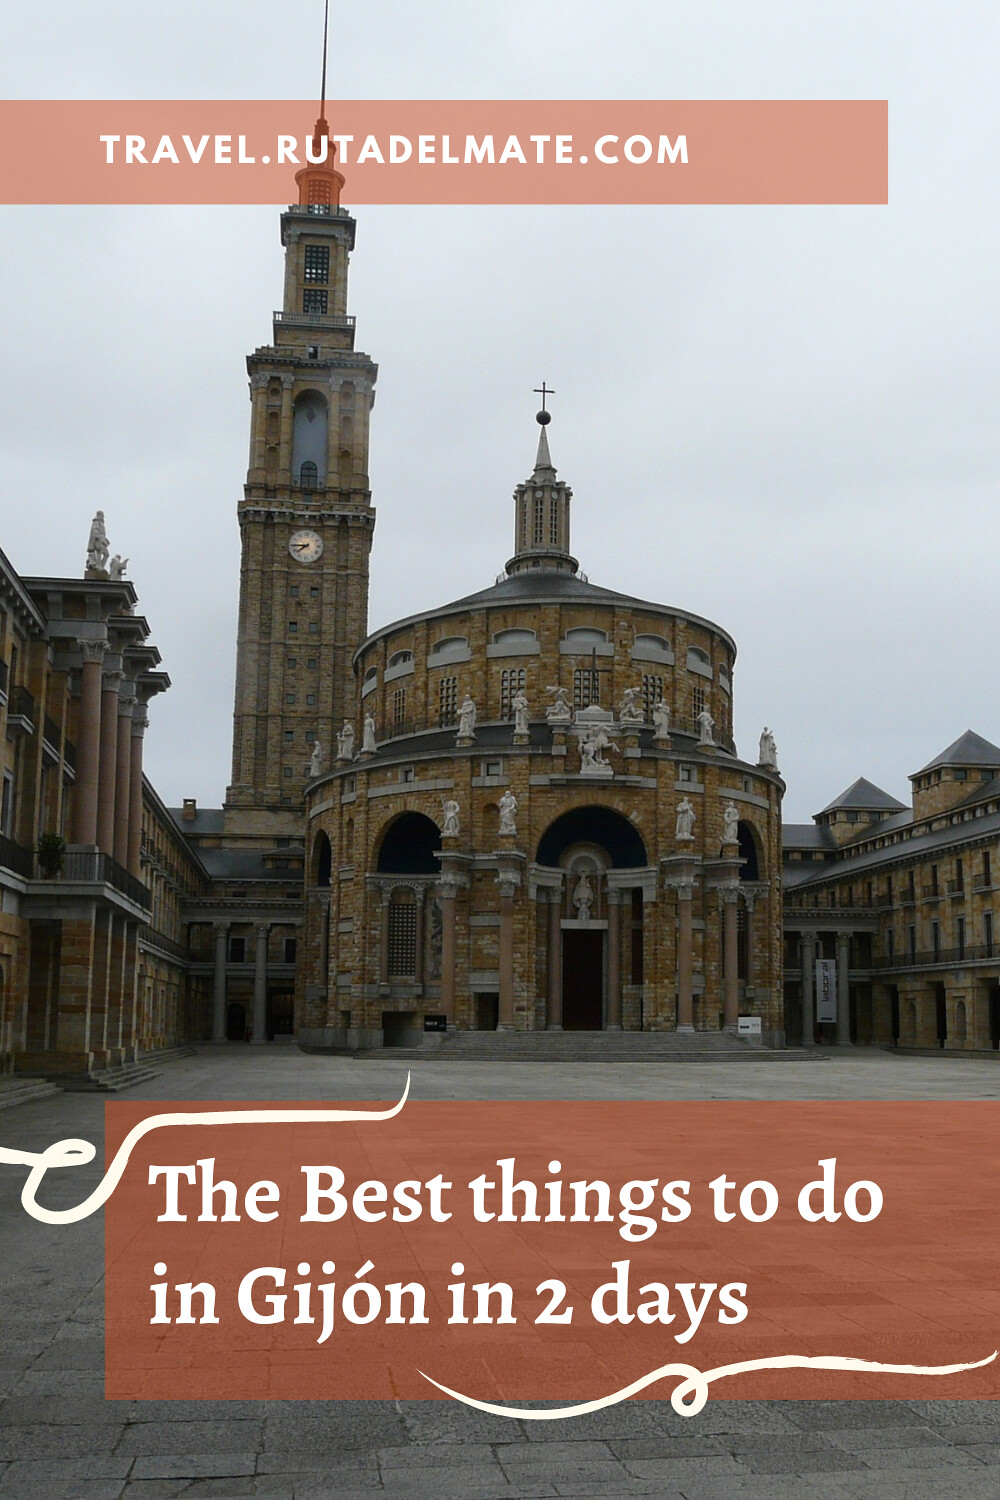 Things to do in Gijón in 2 days